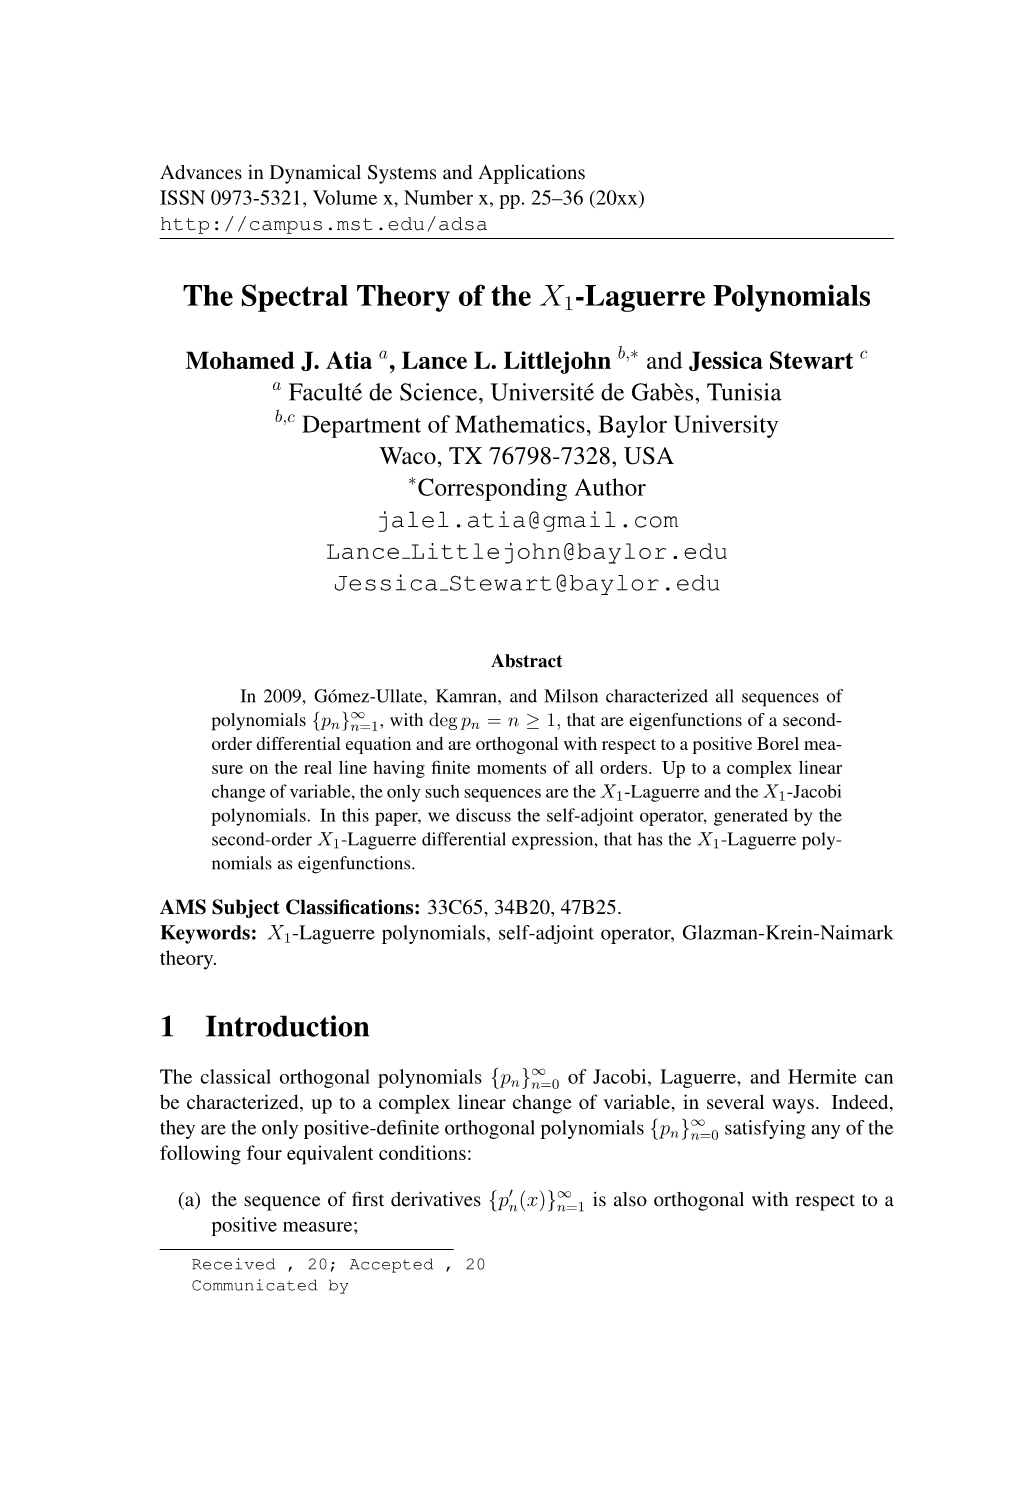 The Spectral Theory of the X1-Laguerre Polynomials 1 Introduction